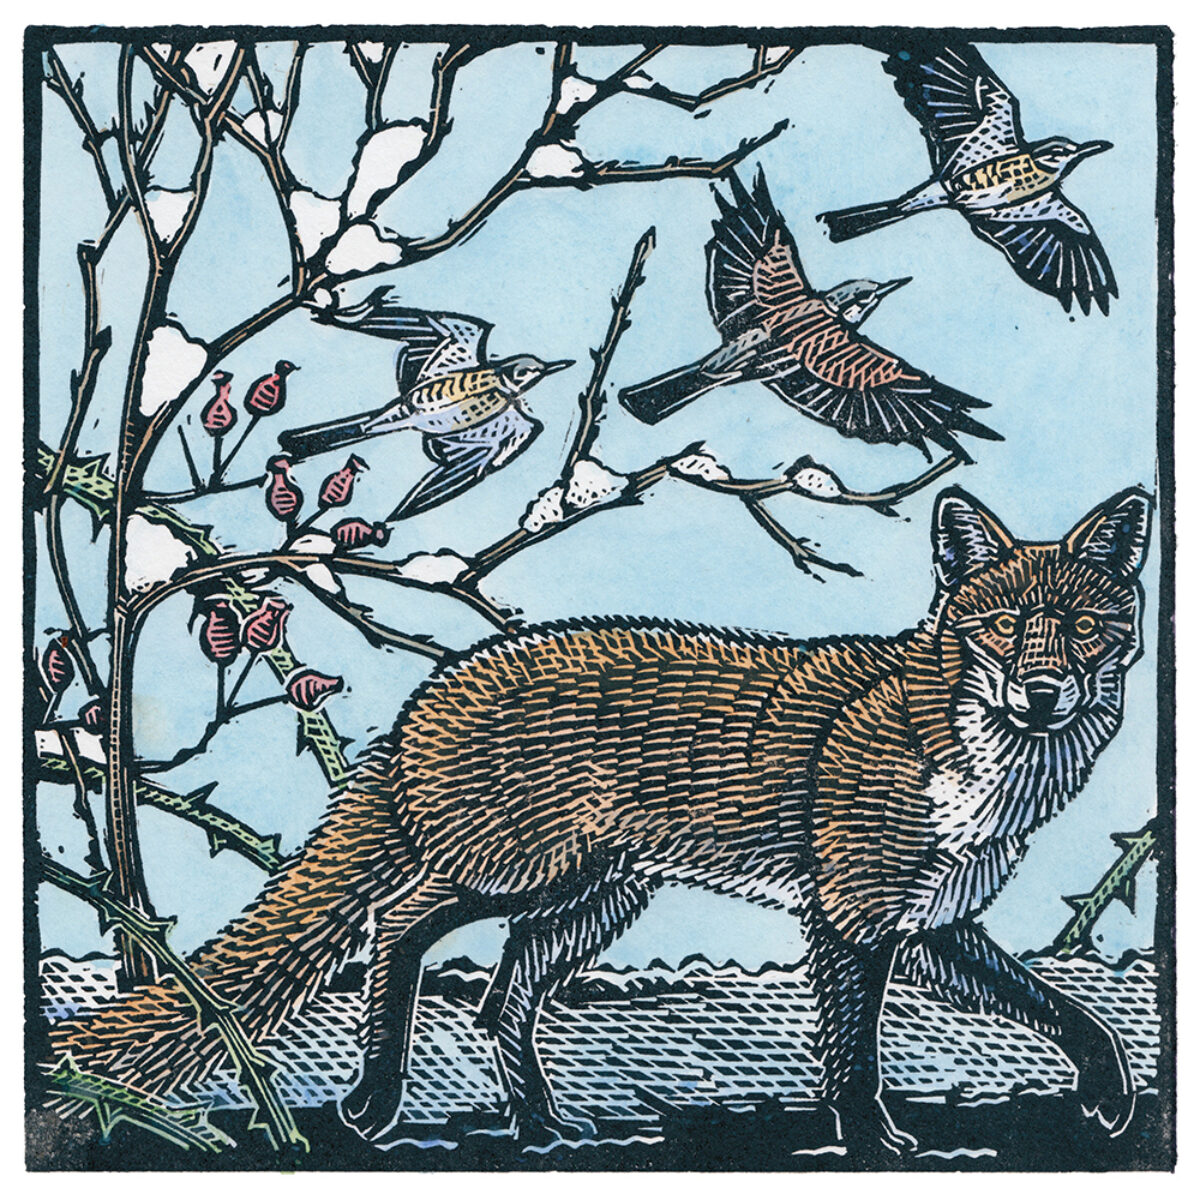 Artwork image titled: Fox and Fieldfares